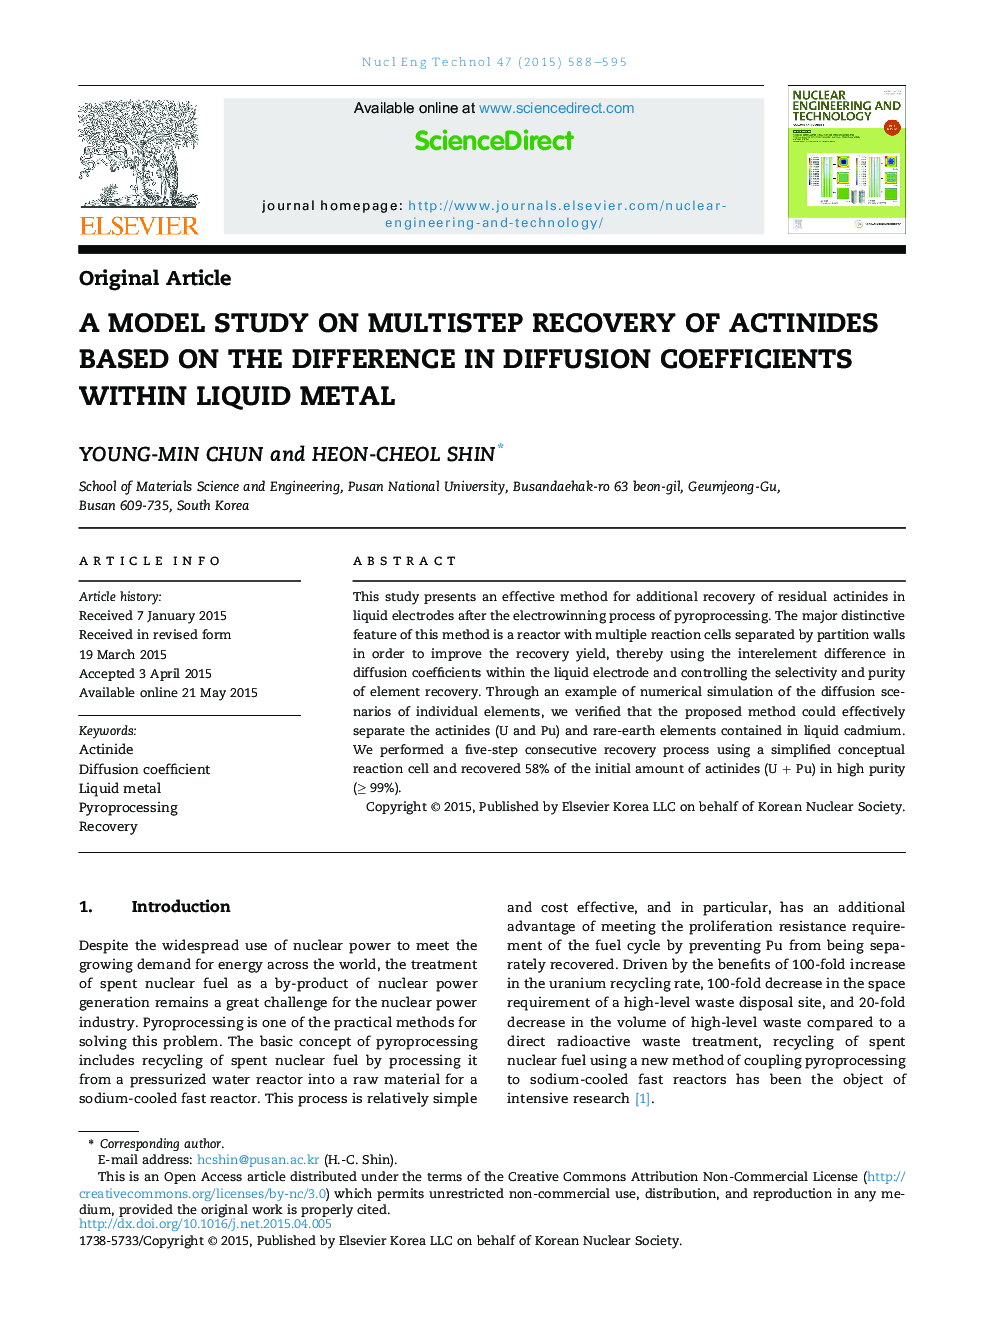 A model study on multistep recovery of actinides based on the difference in diffusion coefficients within liquid metal 